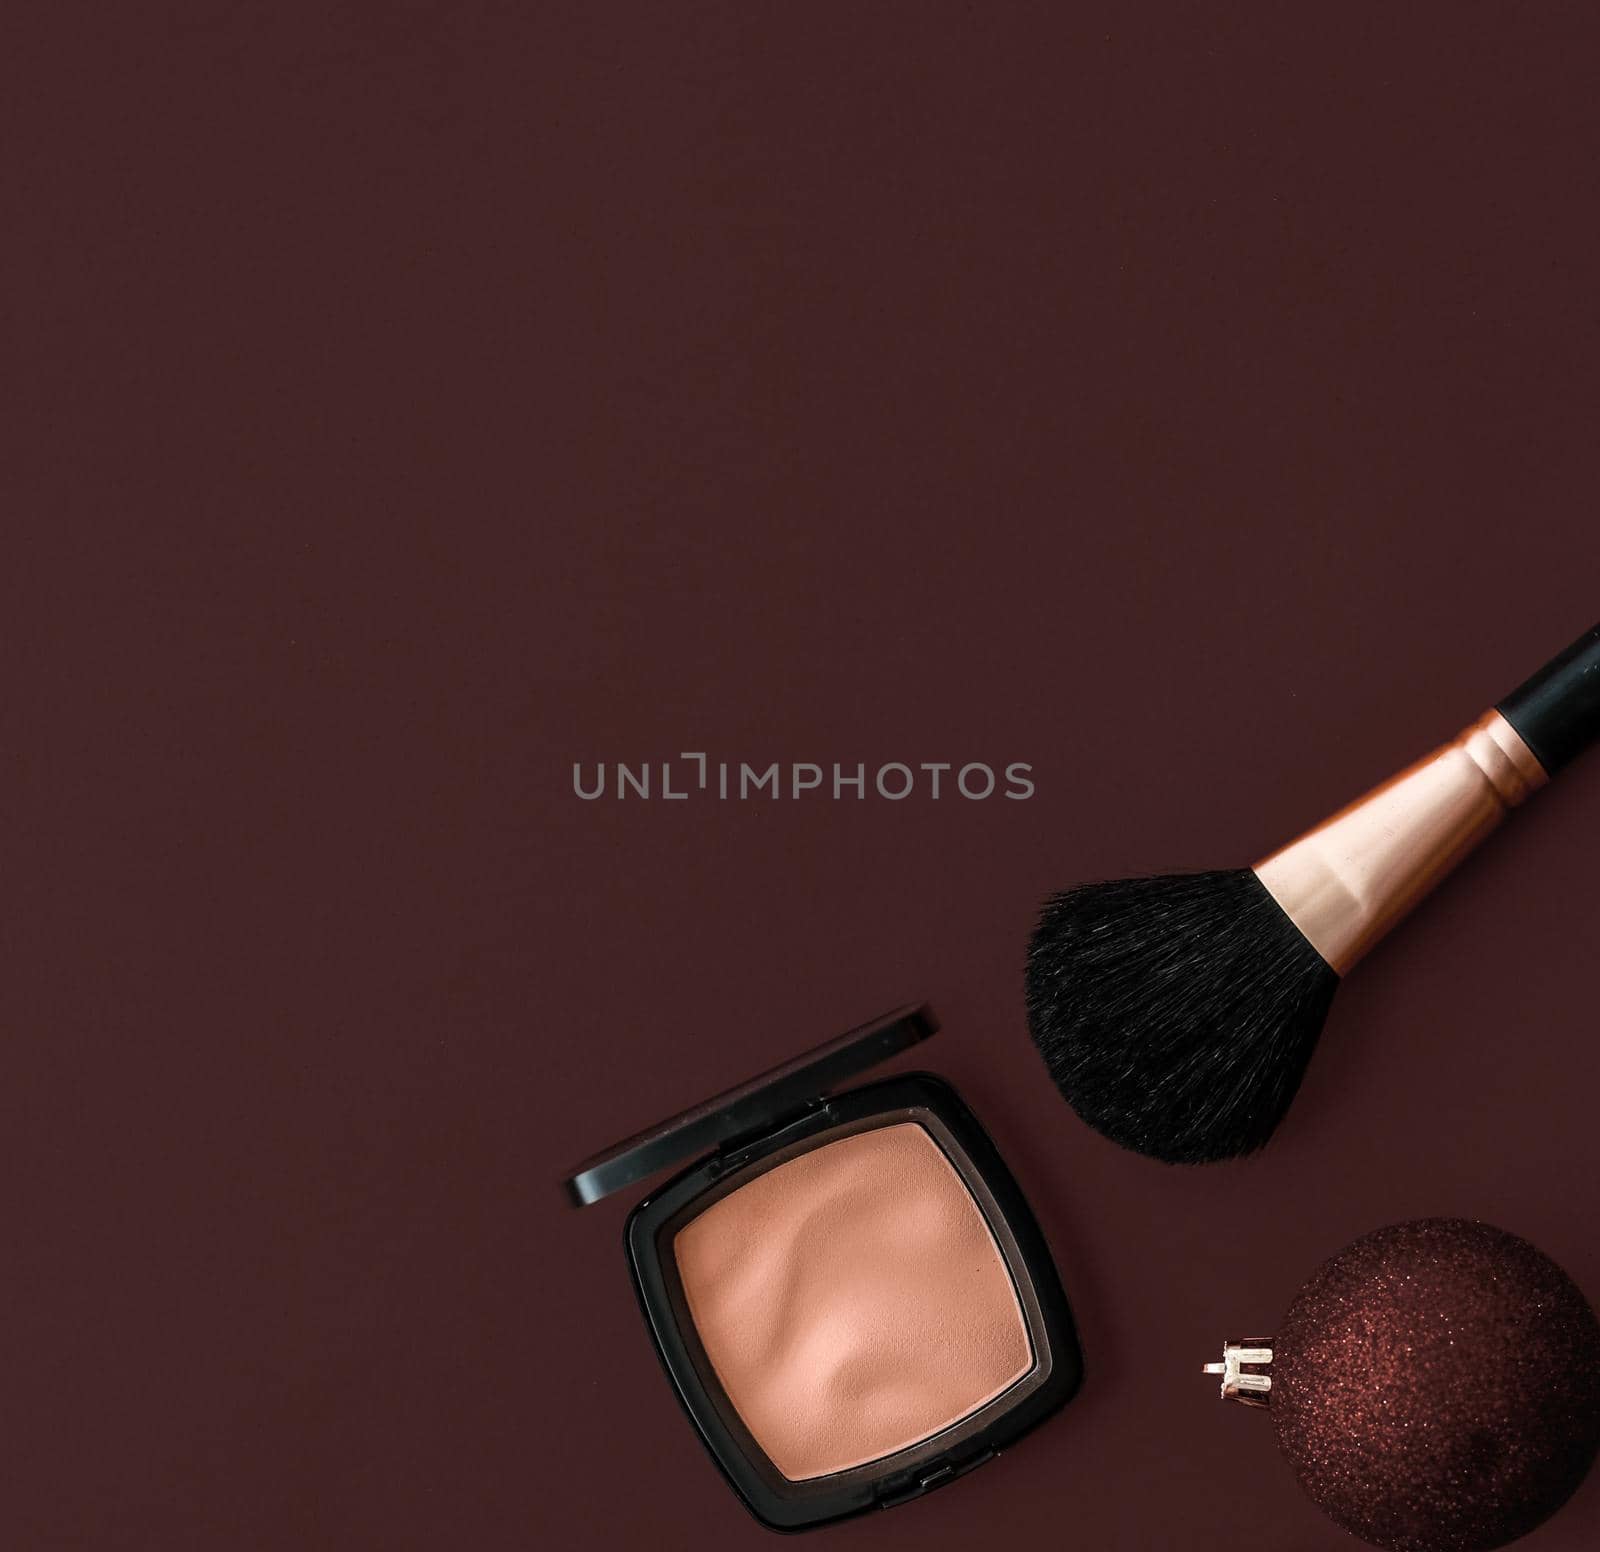 Cosmetic branding, fashion blog cover and girly glamour concept - Make-up and cosmetics product set for beauty brand Christmas sale promotion, luxury chocolate flatlay background as holiday design